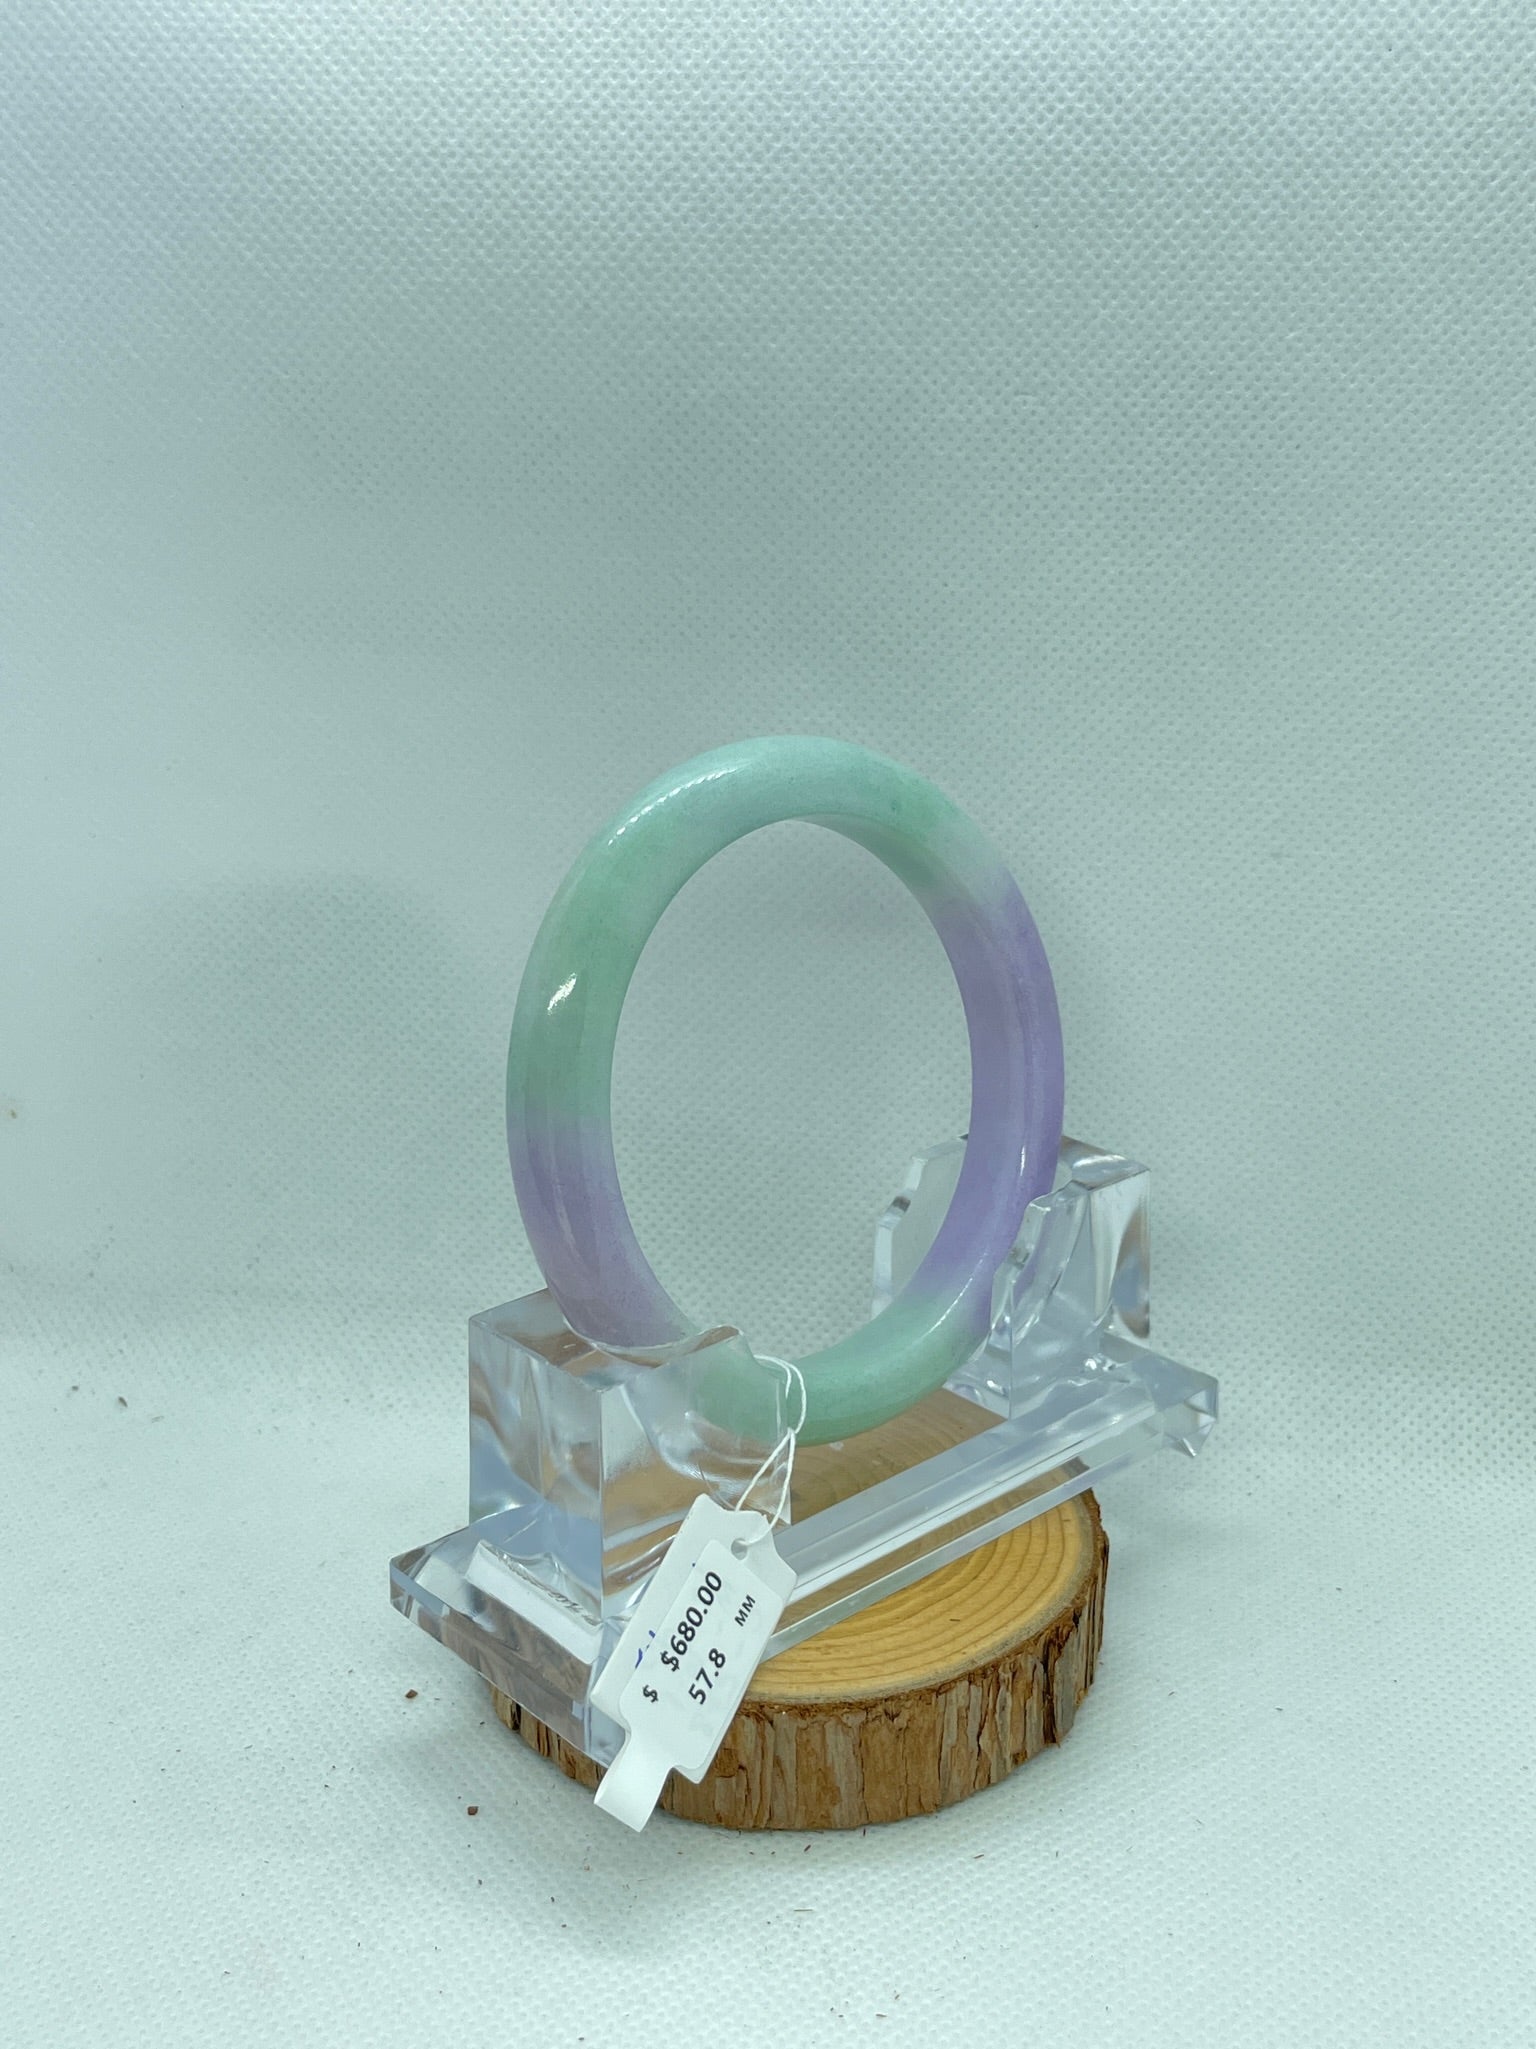 Grade A Natural Jade Bangle with certificate #304